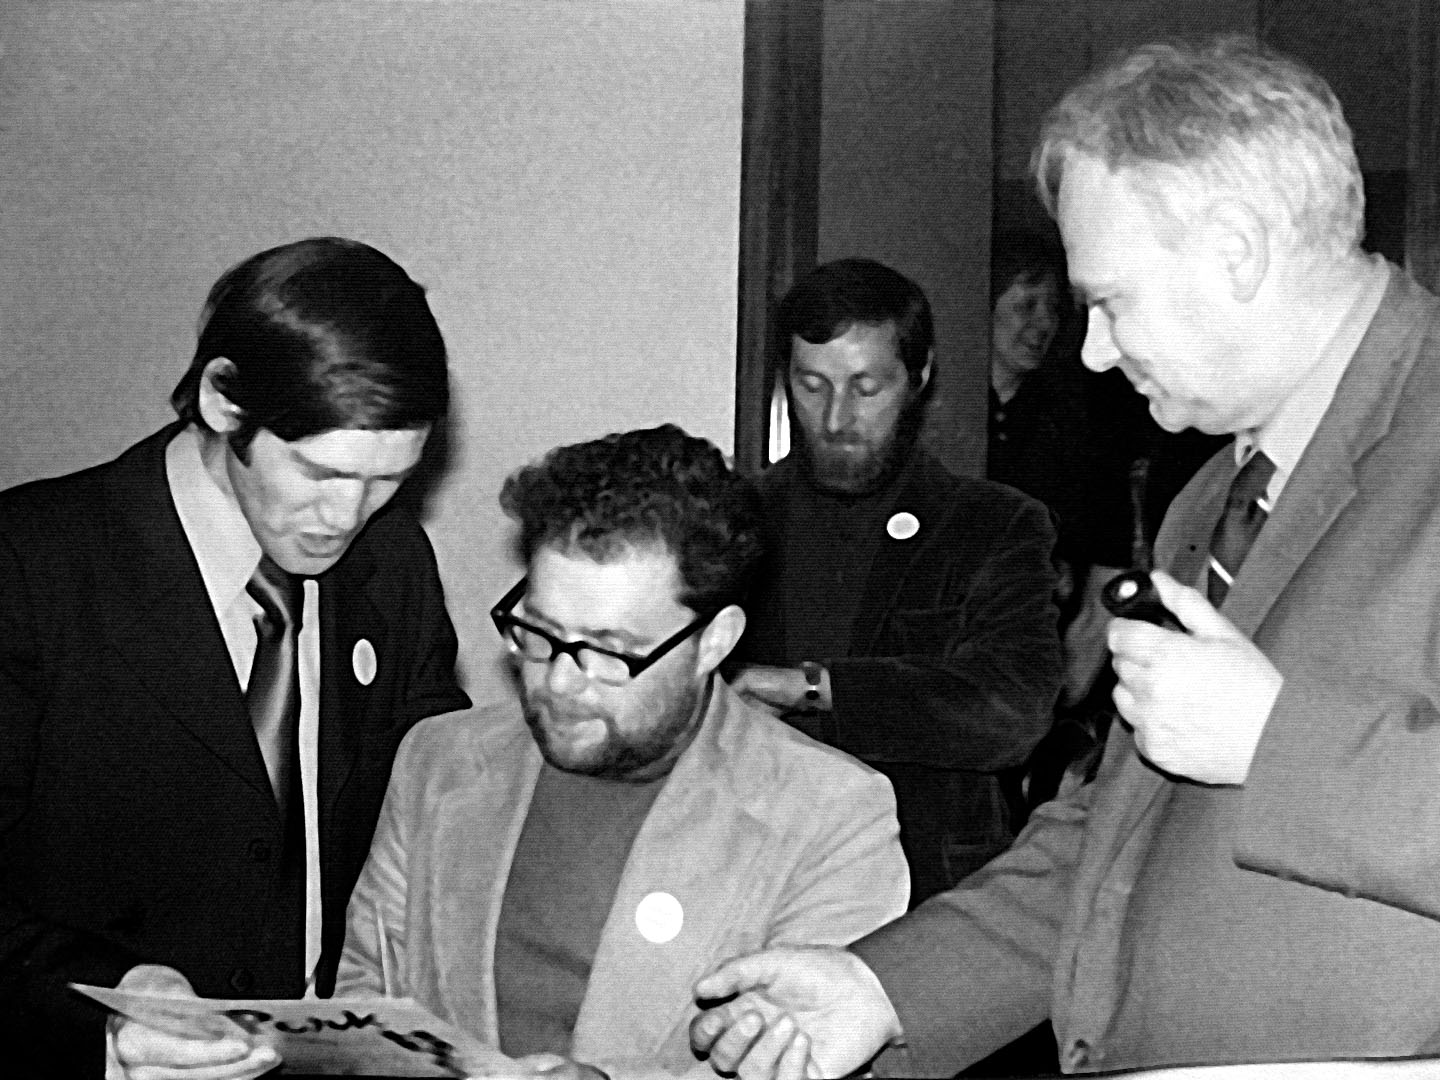 BAA Lunar Section Meeting 4th May 1974 with John McConnell and Patrick Moore